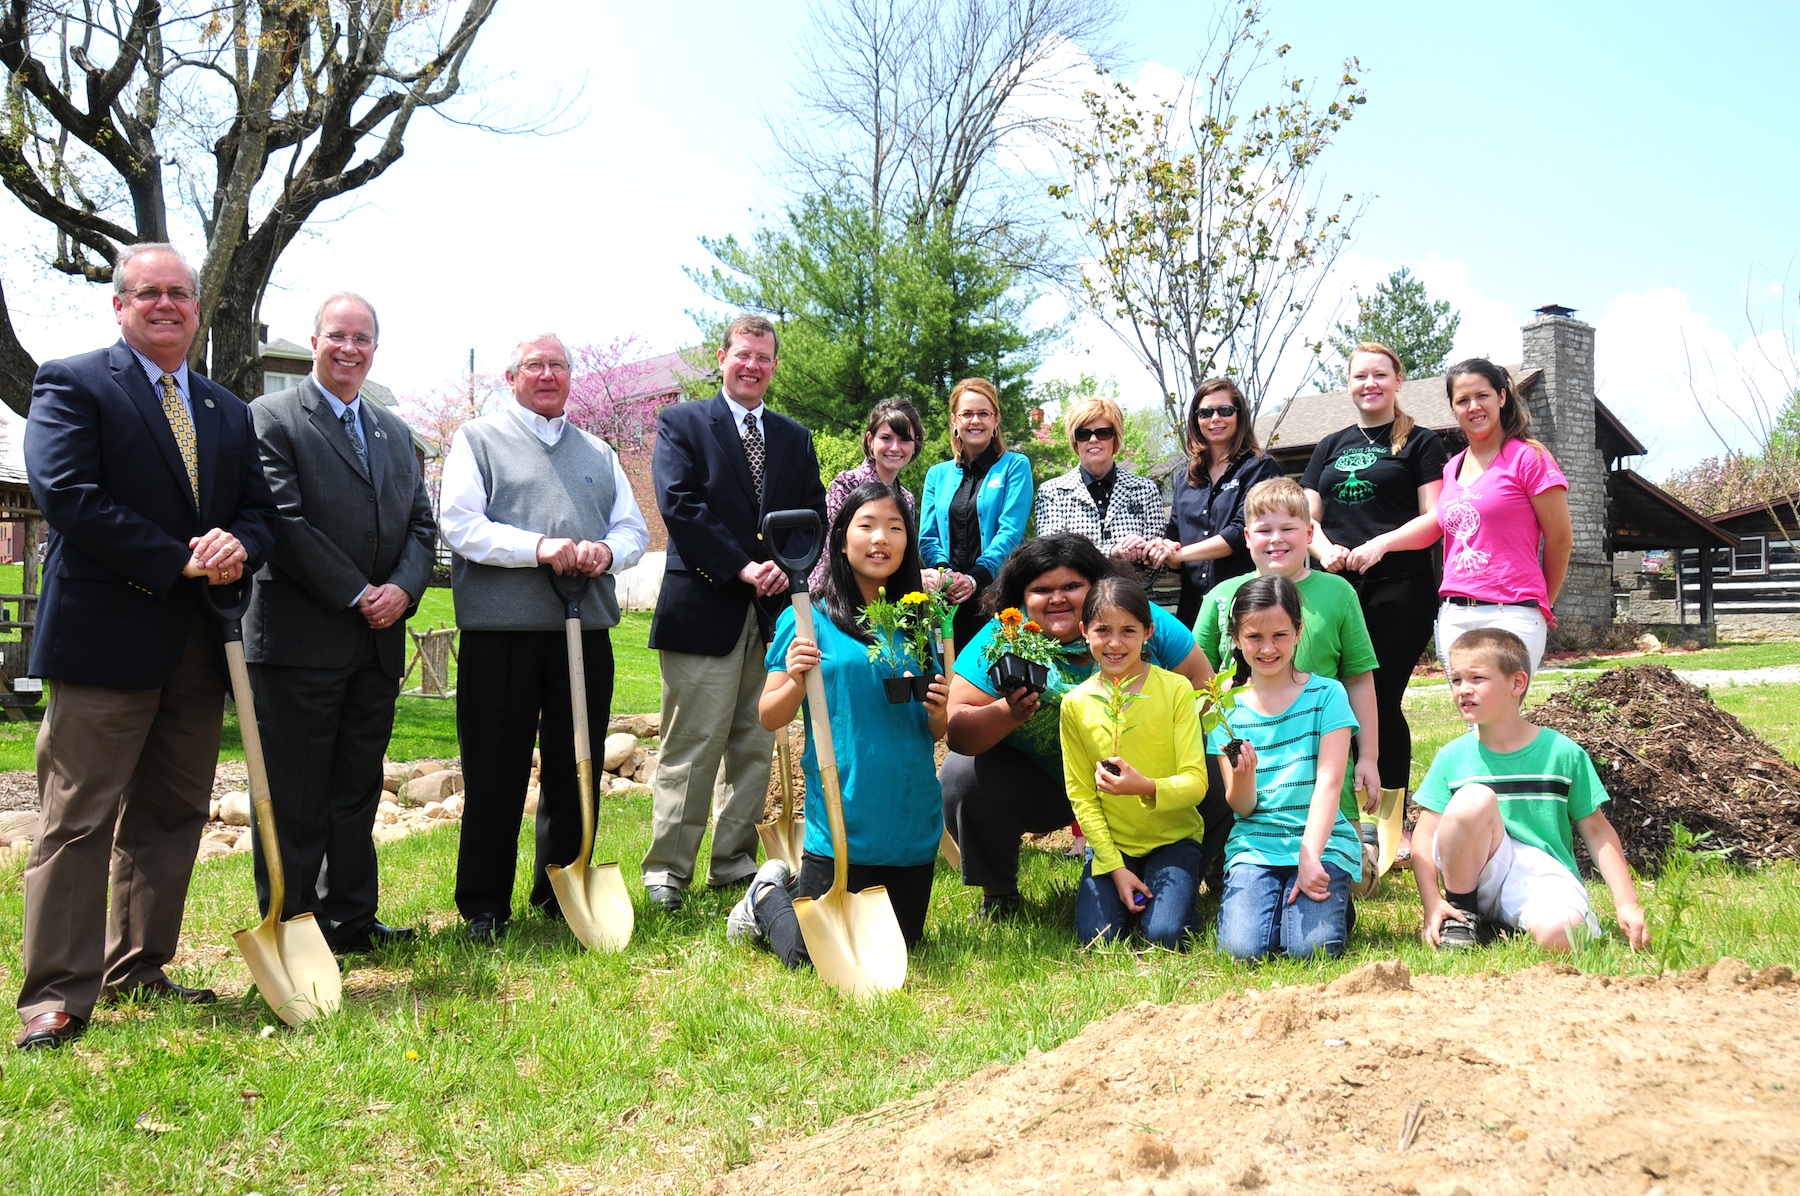 The planting kicked off at CU’s Earth Day 2014 celebration April 22. From left, standing, are Campbellsville Mayor Tony Young, CU president Dr. Michael V. Carter, Taylor County Judge Eddie Rogers, guest speaker Dr. Matthew Sleeth, SGA president Jacqueline Nelson, LG&E KU representatives Rhonda Rose, Gidget Stubbs and Tiffany Cox, and Green Minds student representatives Constanze Sophie Mälzer and Ana Gonzalez. In the front row, from left, are visitors Yoonseo Nam; Yunisha Richerson, Kaylynn Smith, Sarah Adkins, Blake Settle behind Sarah, and Caiden Yocom. (CU Photo by Ye Wei "Vicky")